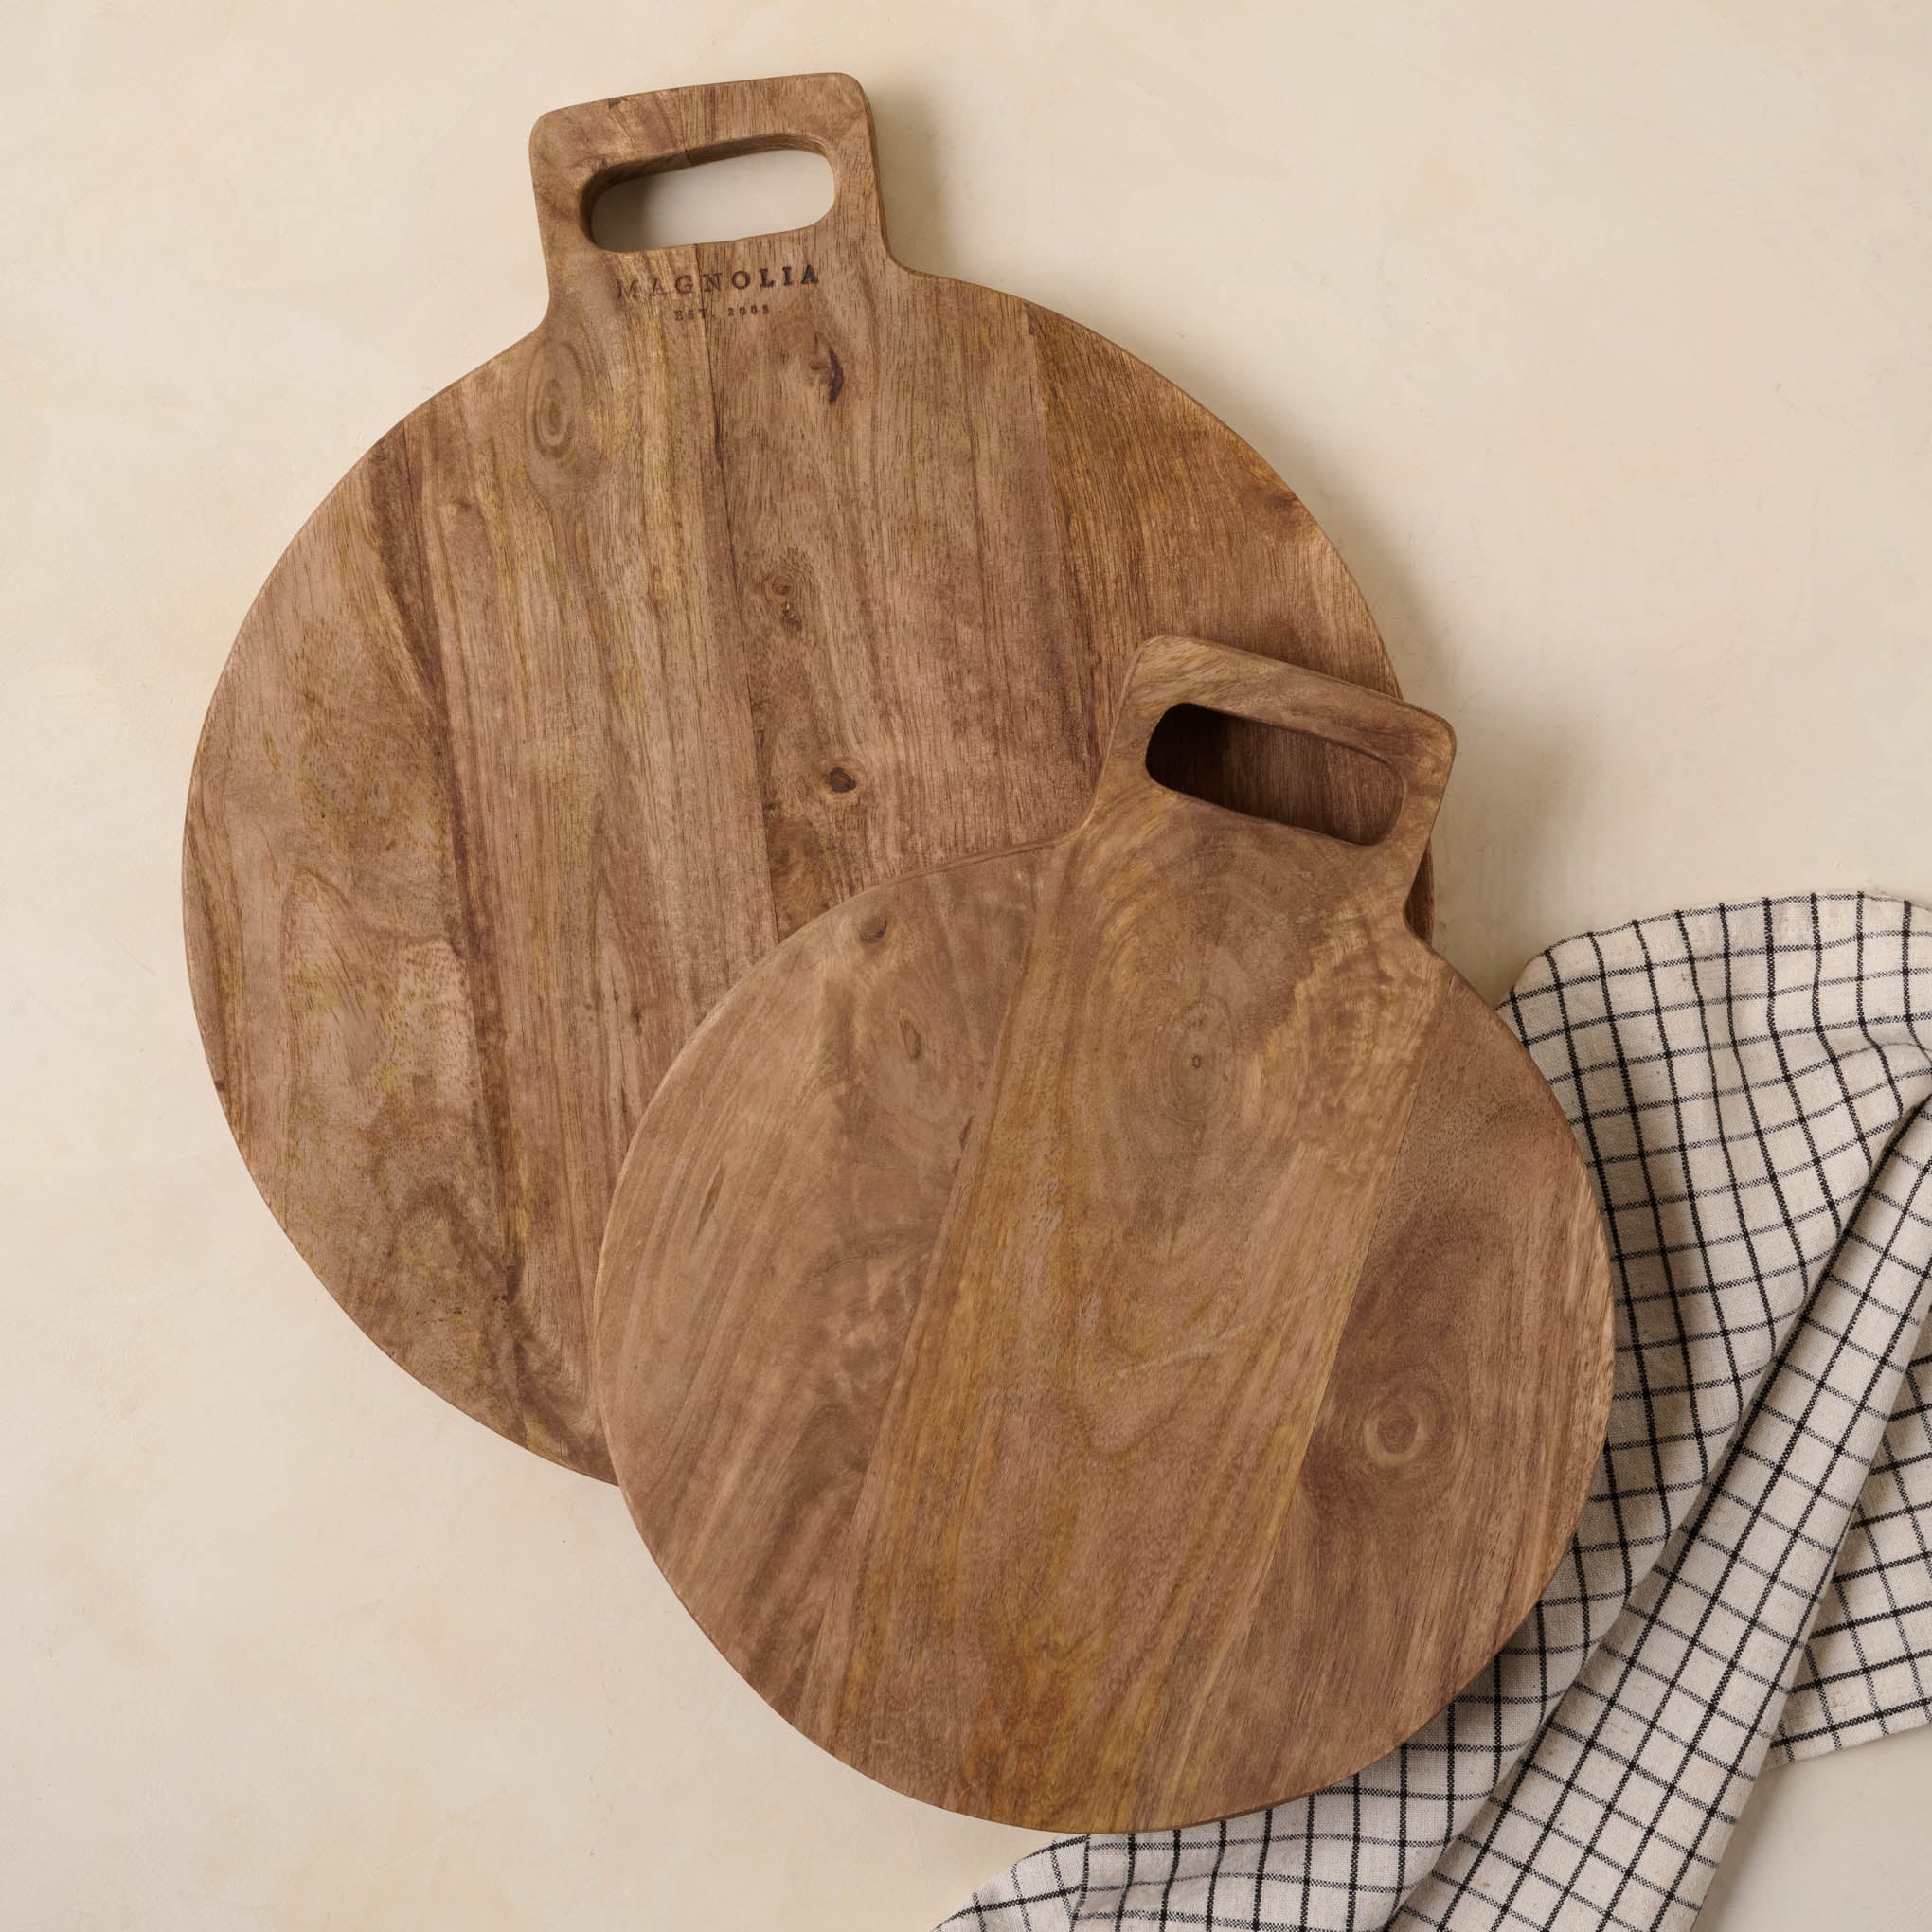 Mango Wood Round Bread Board in two sizes Items range from $34.00 to $56.00